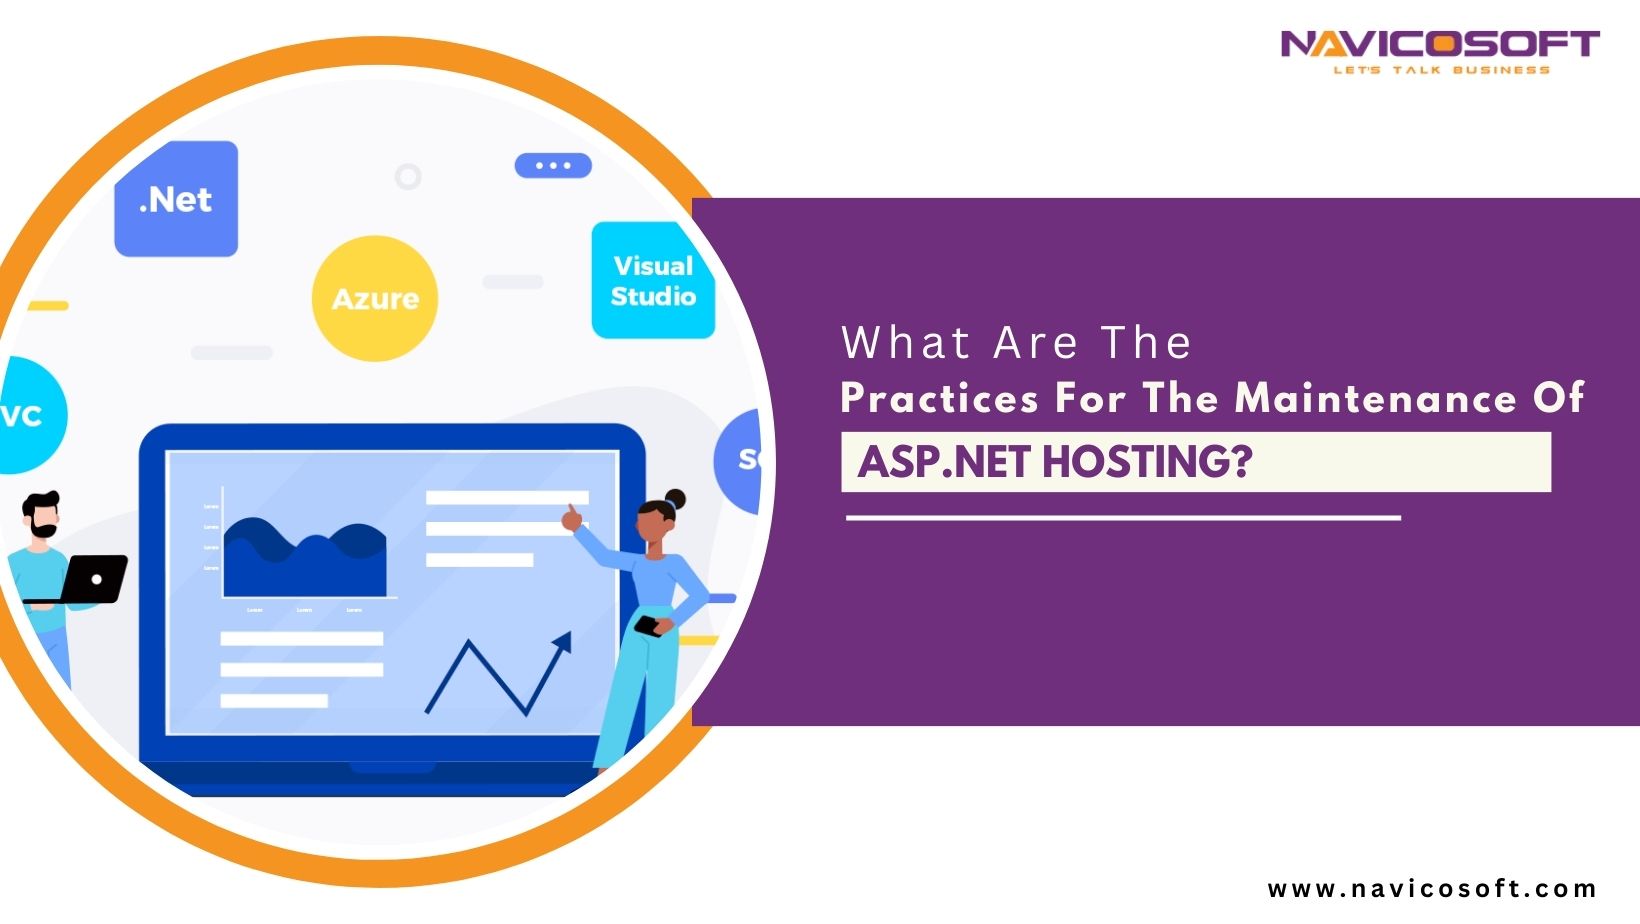 What are the practices for the maintenance of asp.net hosting? 